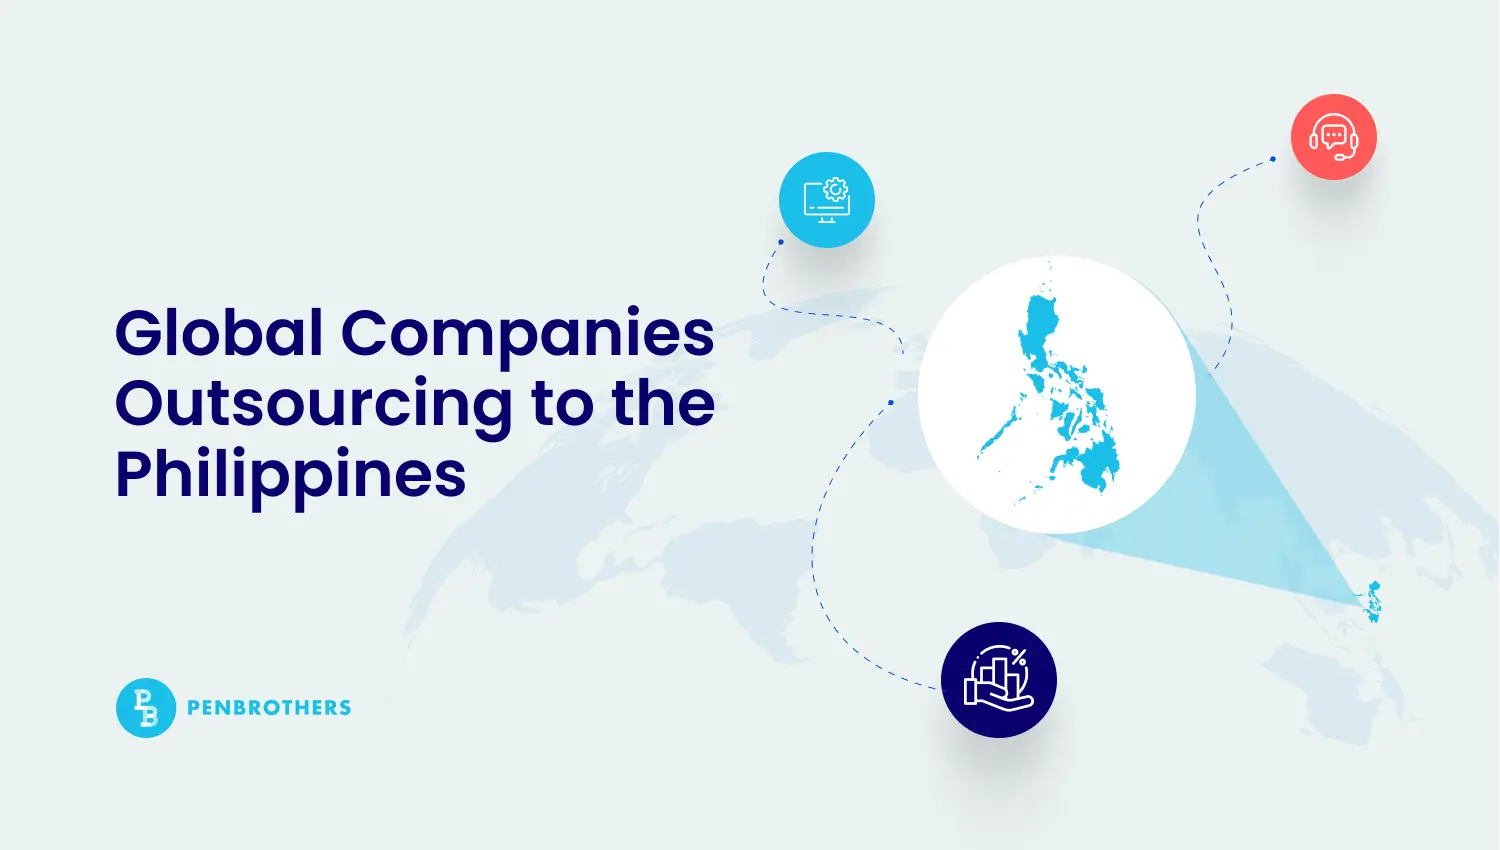 Top 10 Global Companies Outsourcing to the Philippines